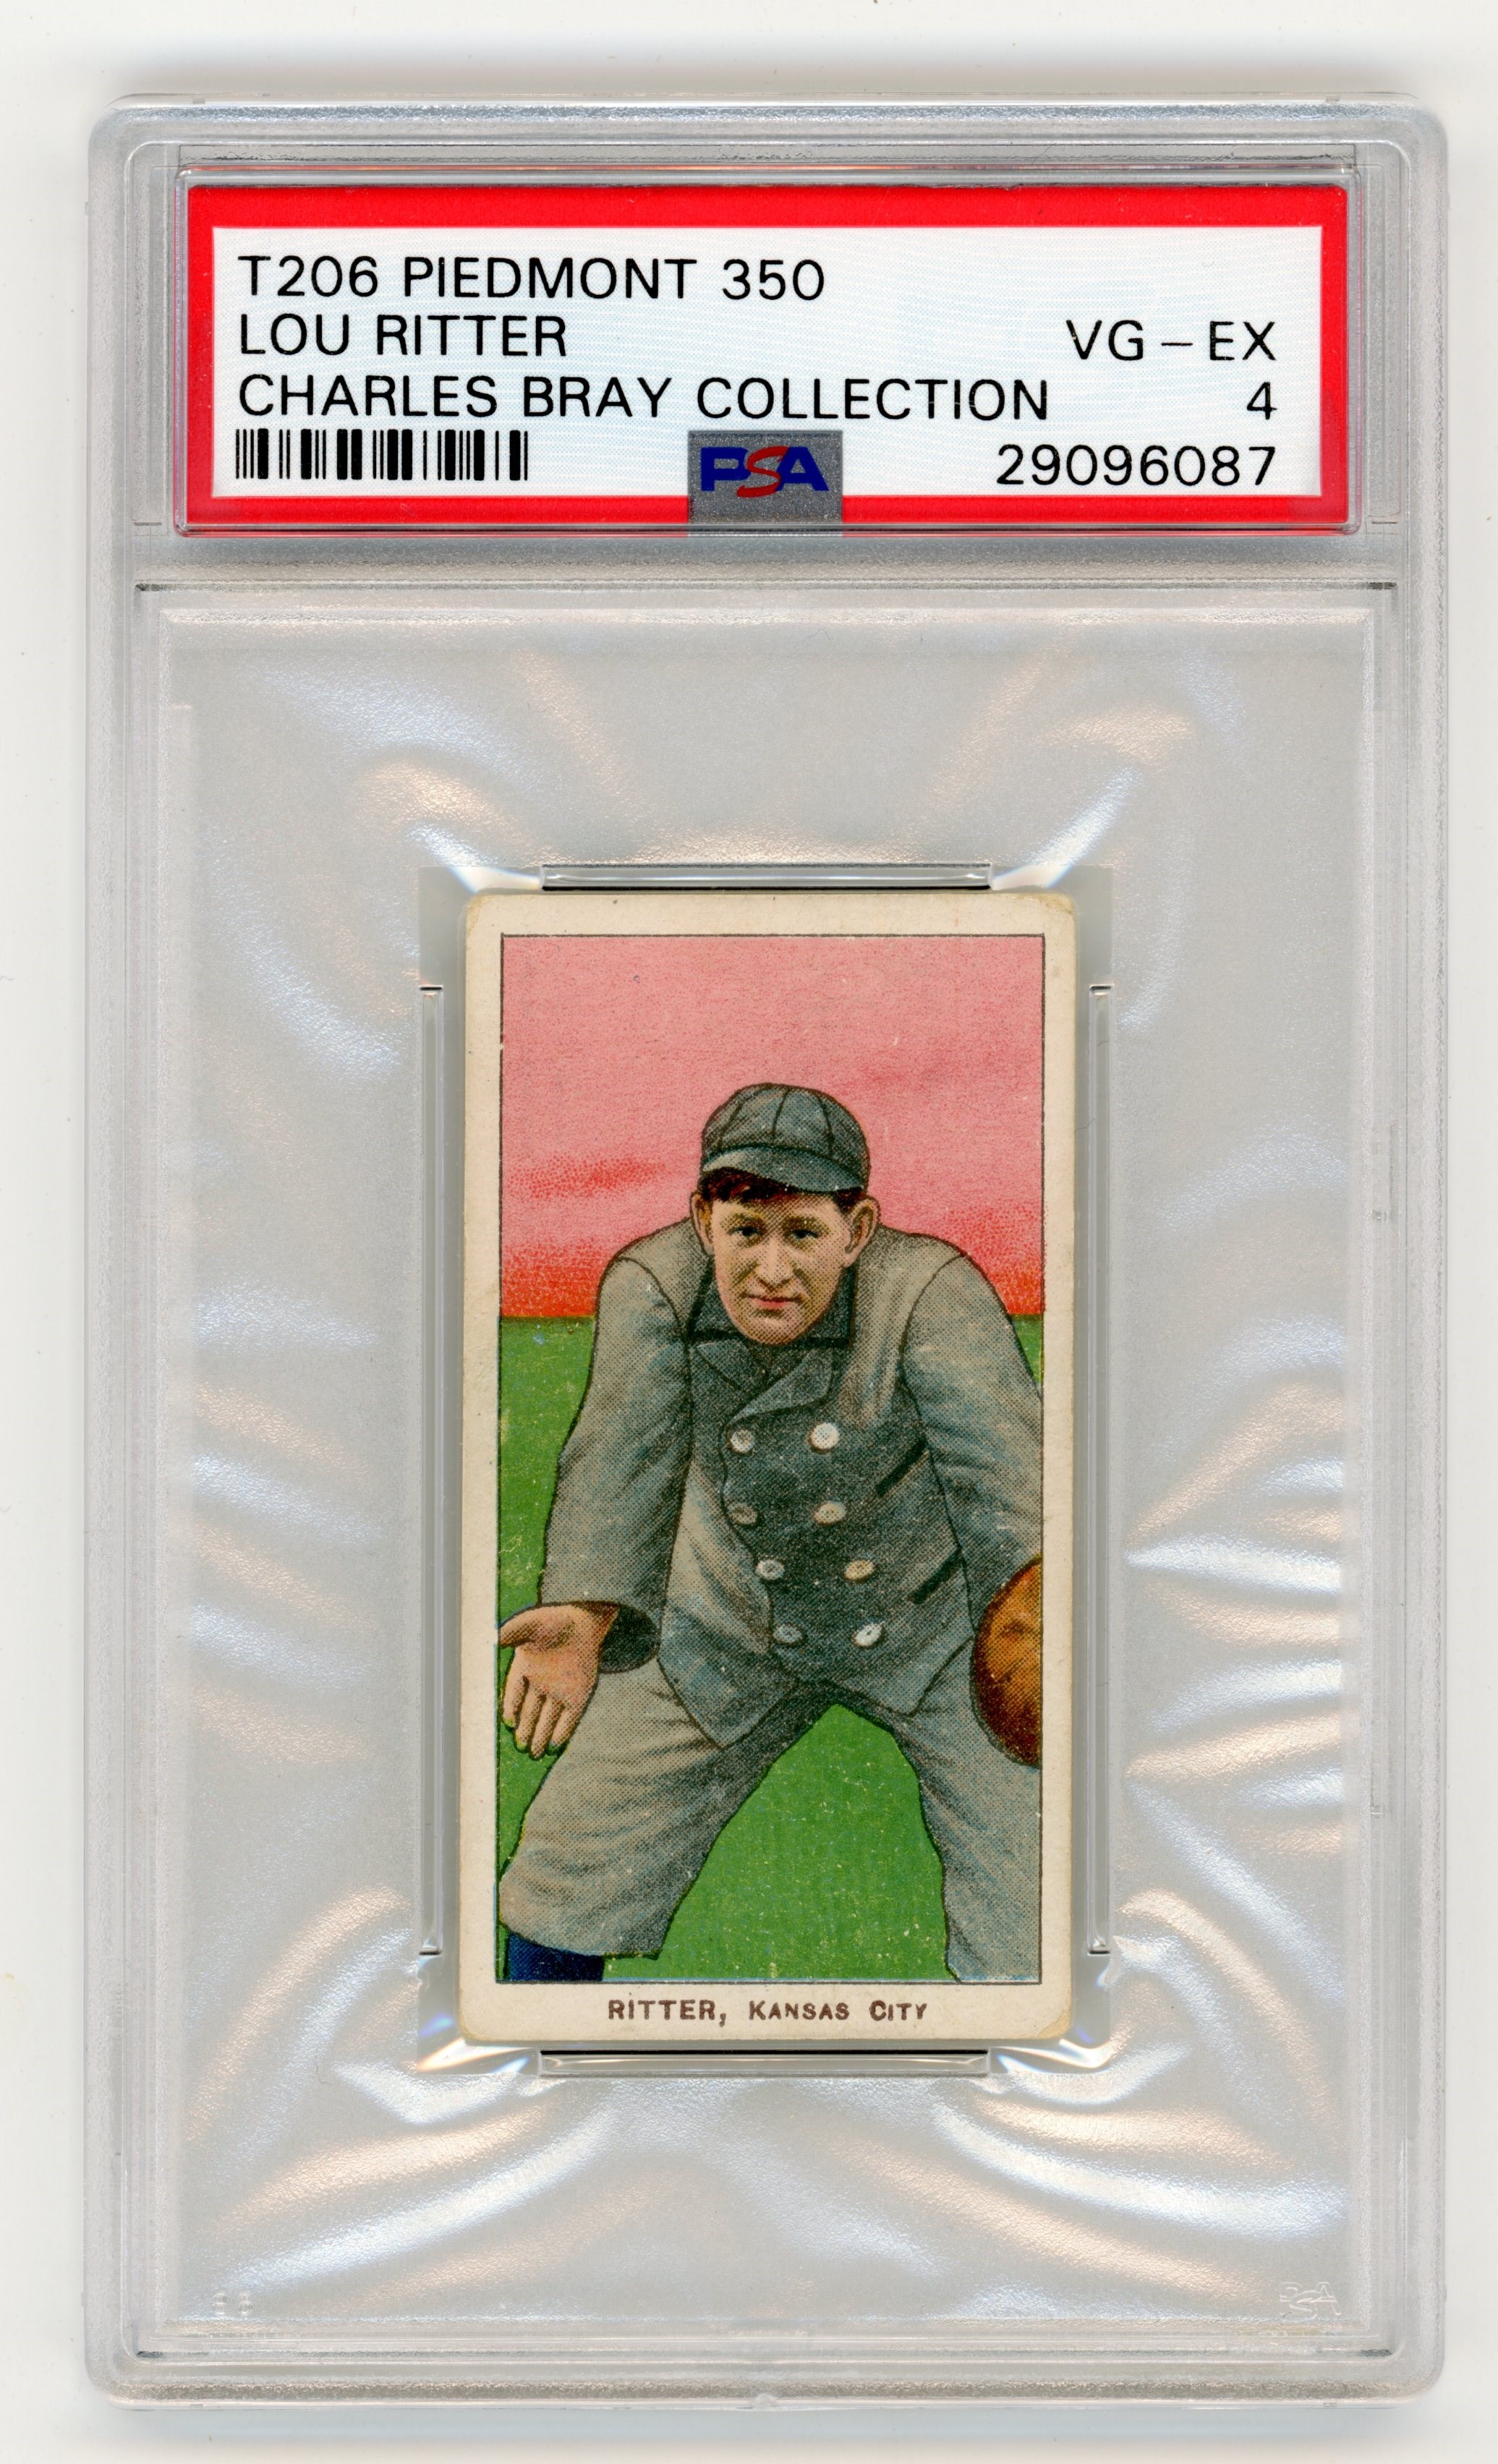 Baseball and Trading Cards - T206 Piedmont 350 Lou Ritter PSA VG-EX 4 From the Charles Bray Collection.